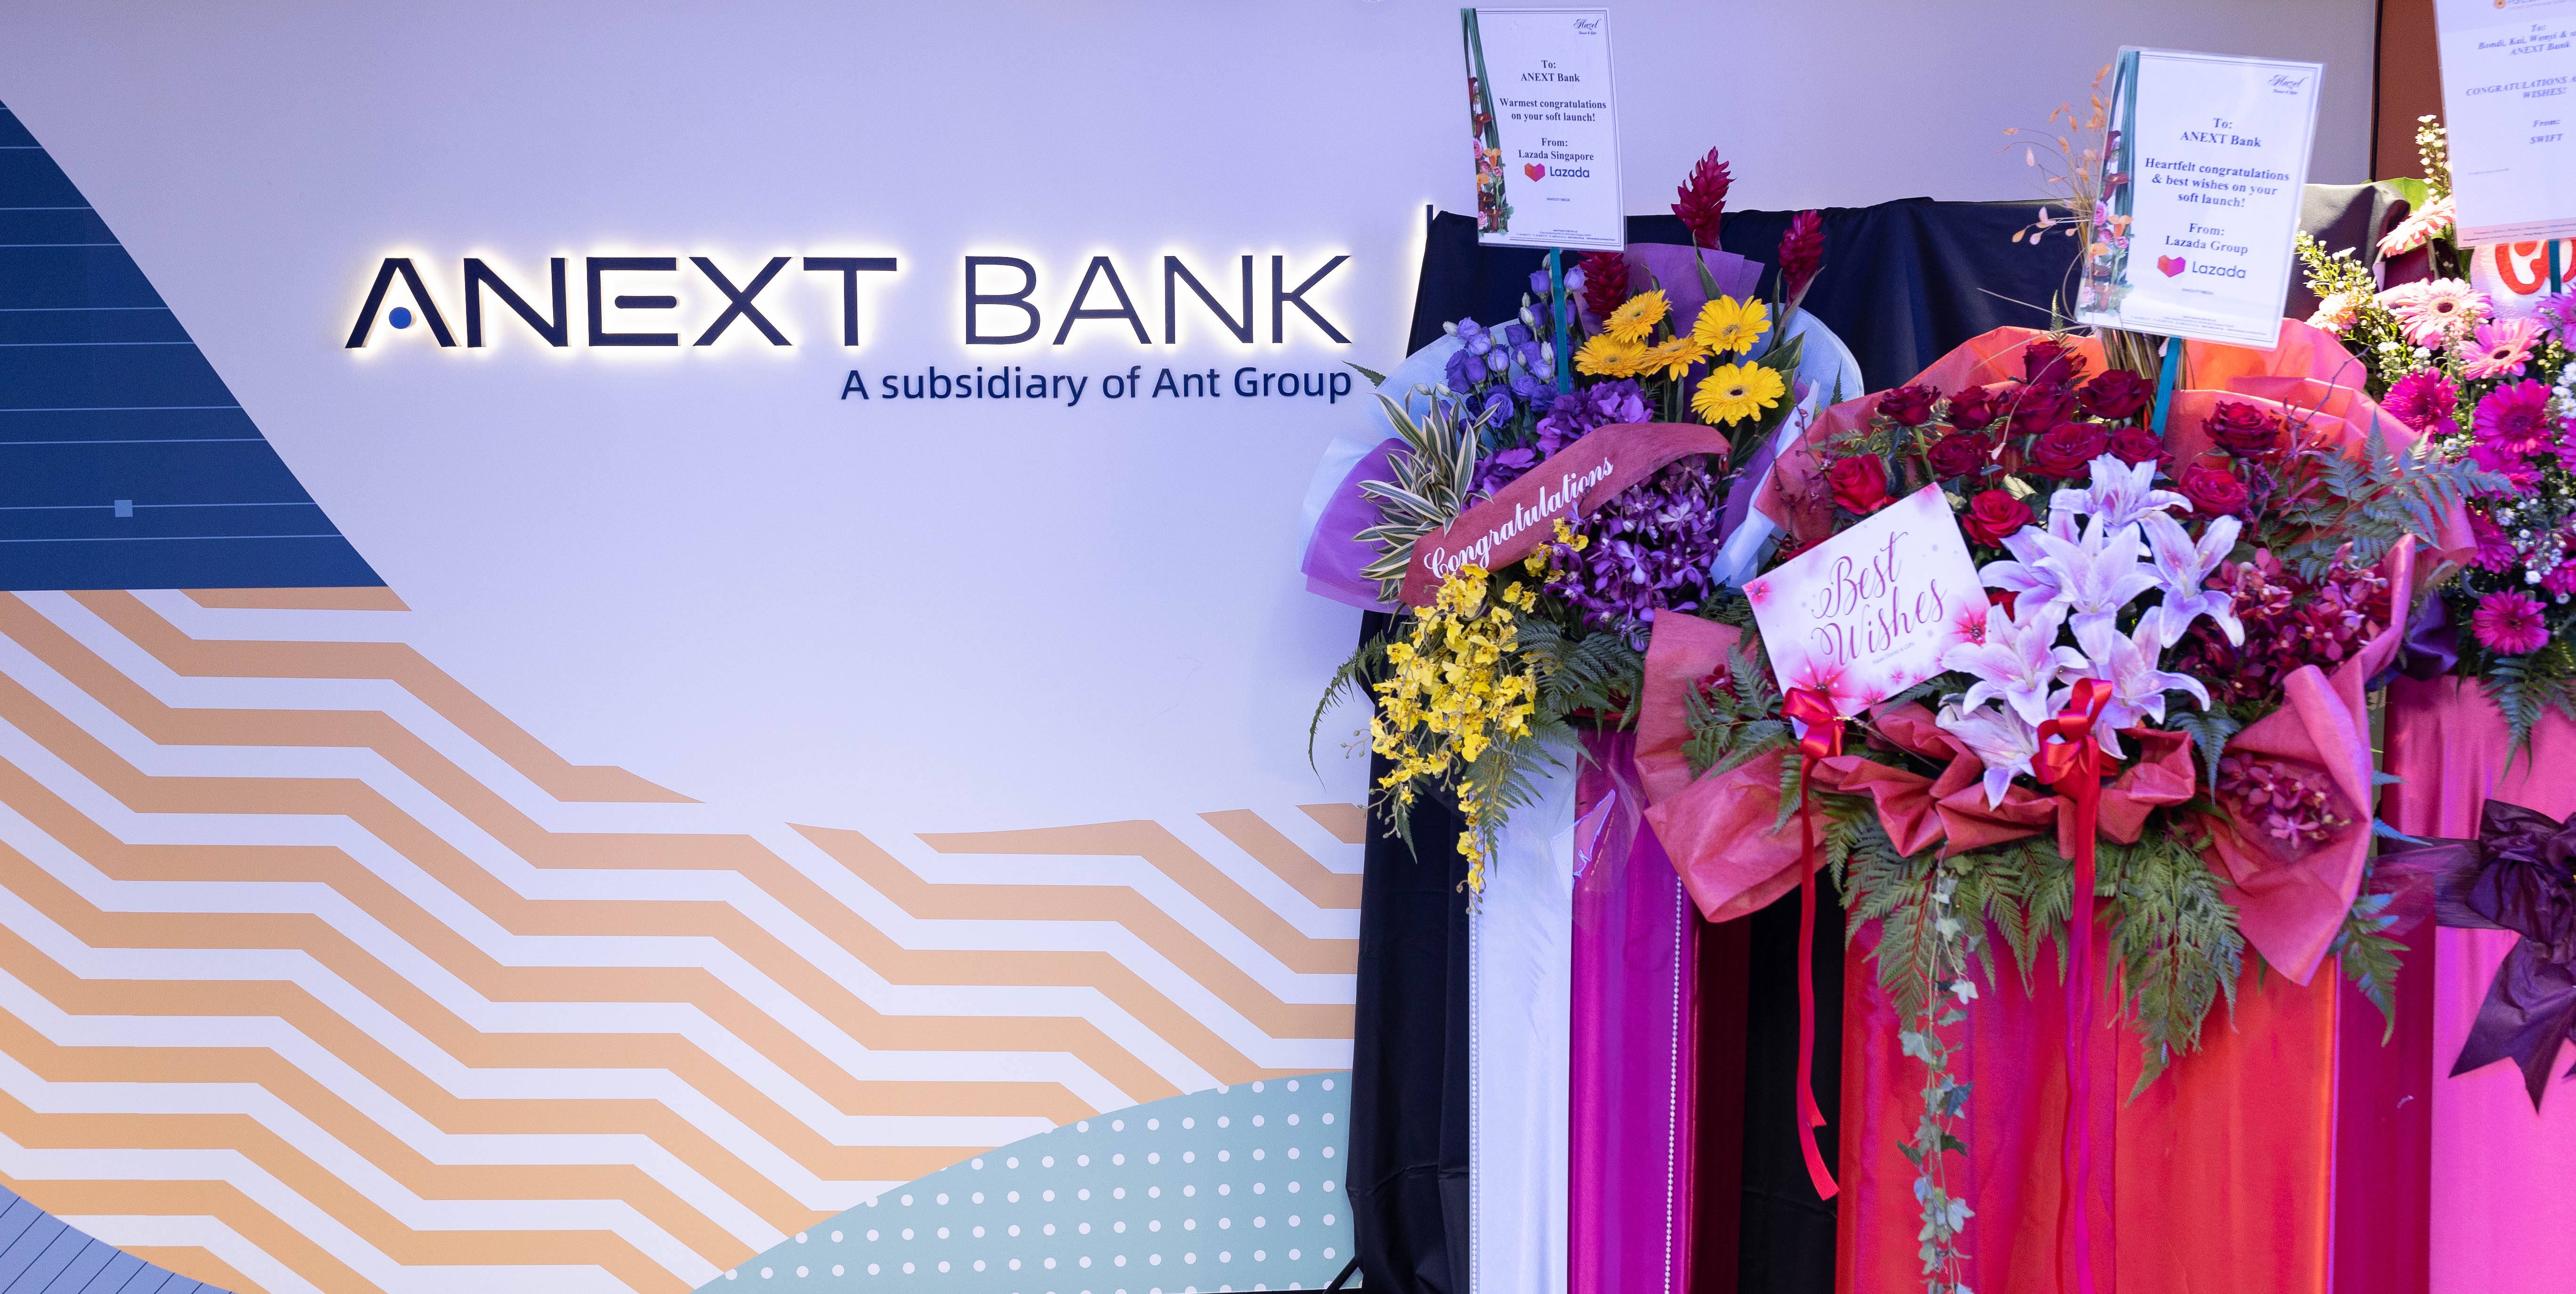 Ant Group pumps $148m into SG digibank unit Anext Bank